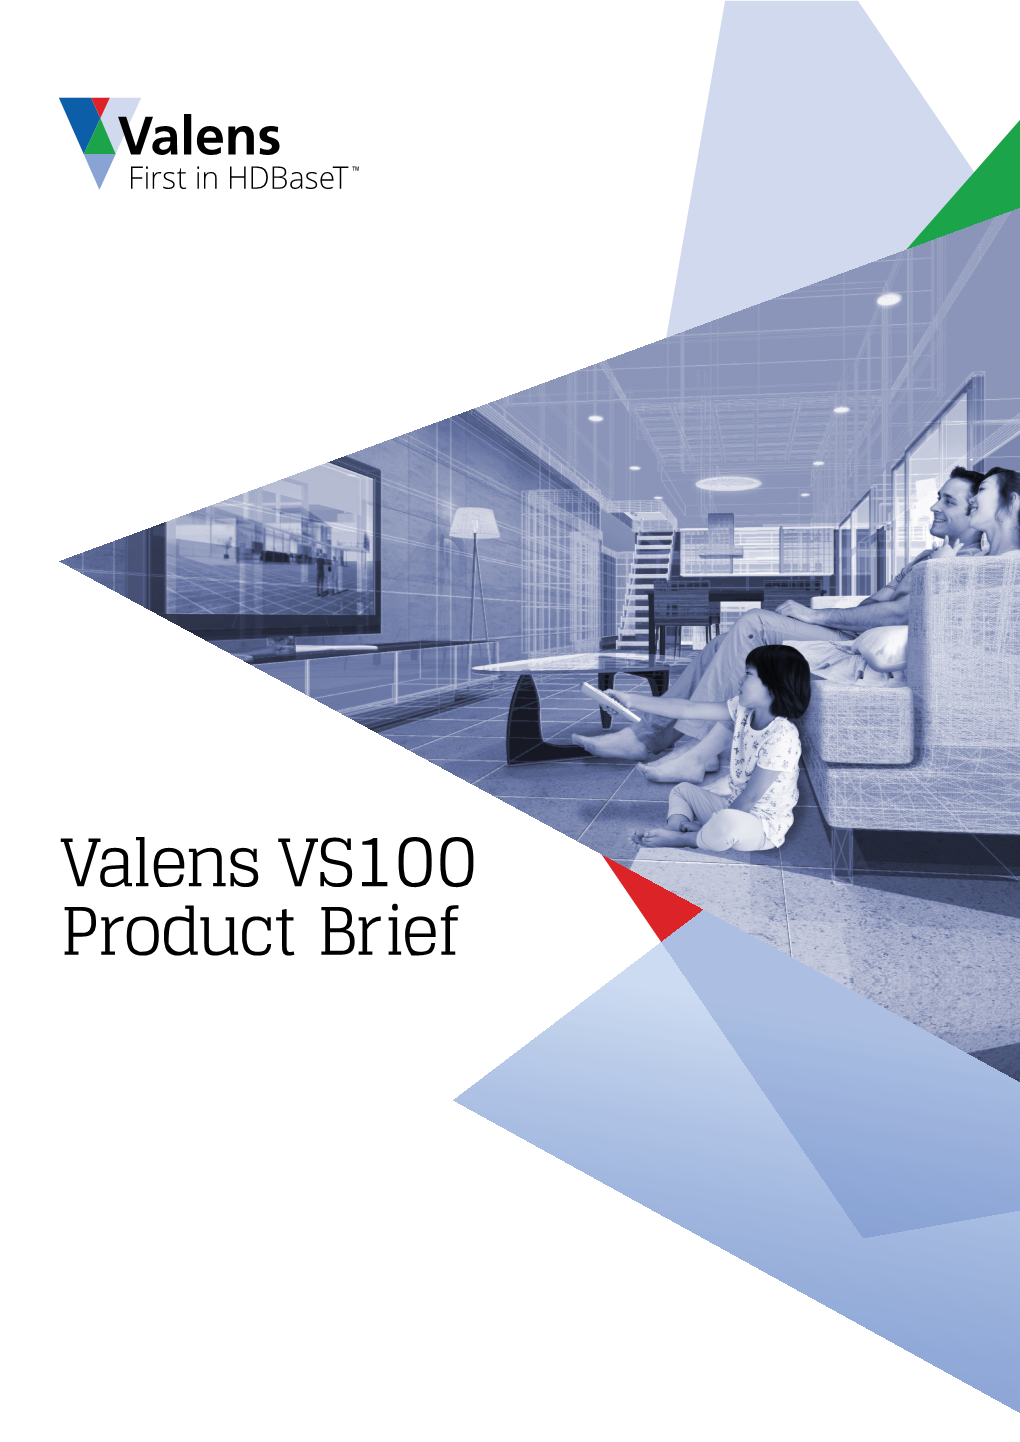 Valens VS100 Product Brief Overview